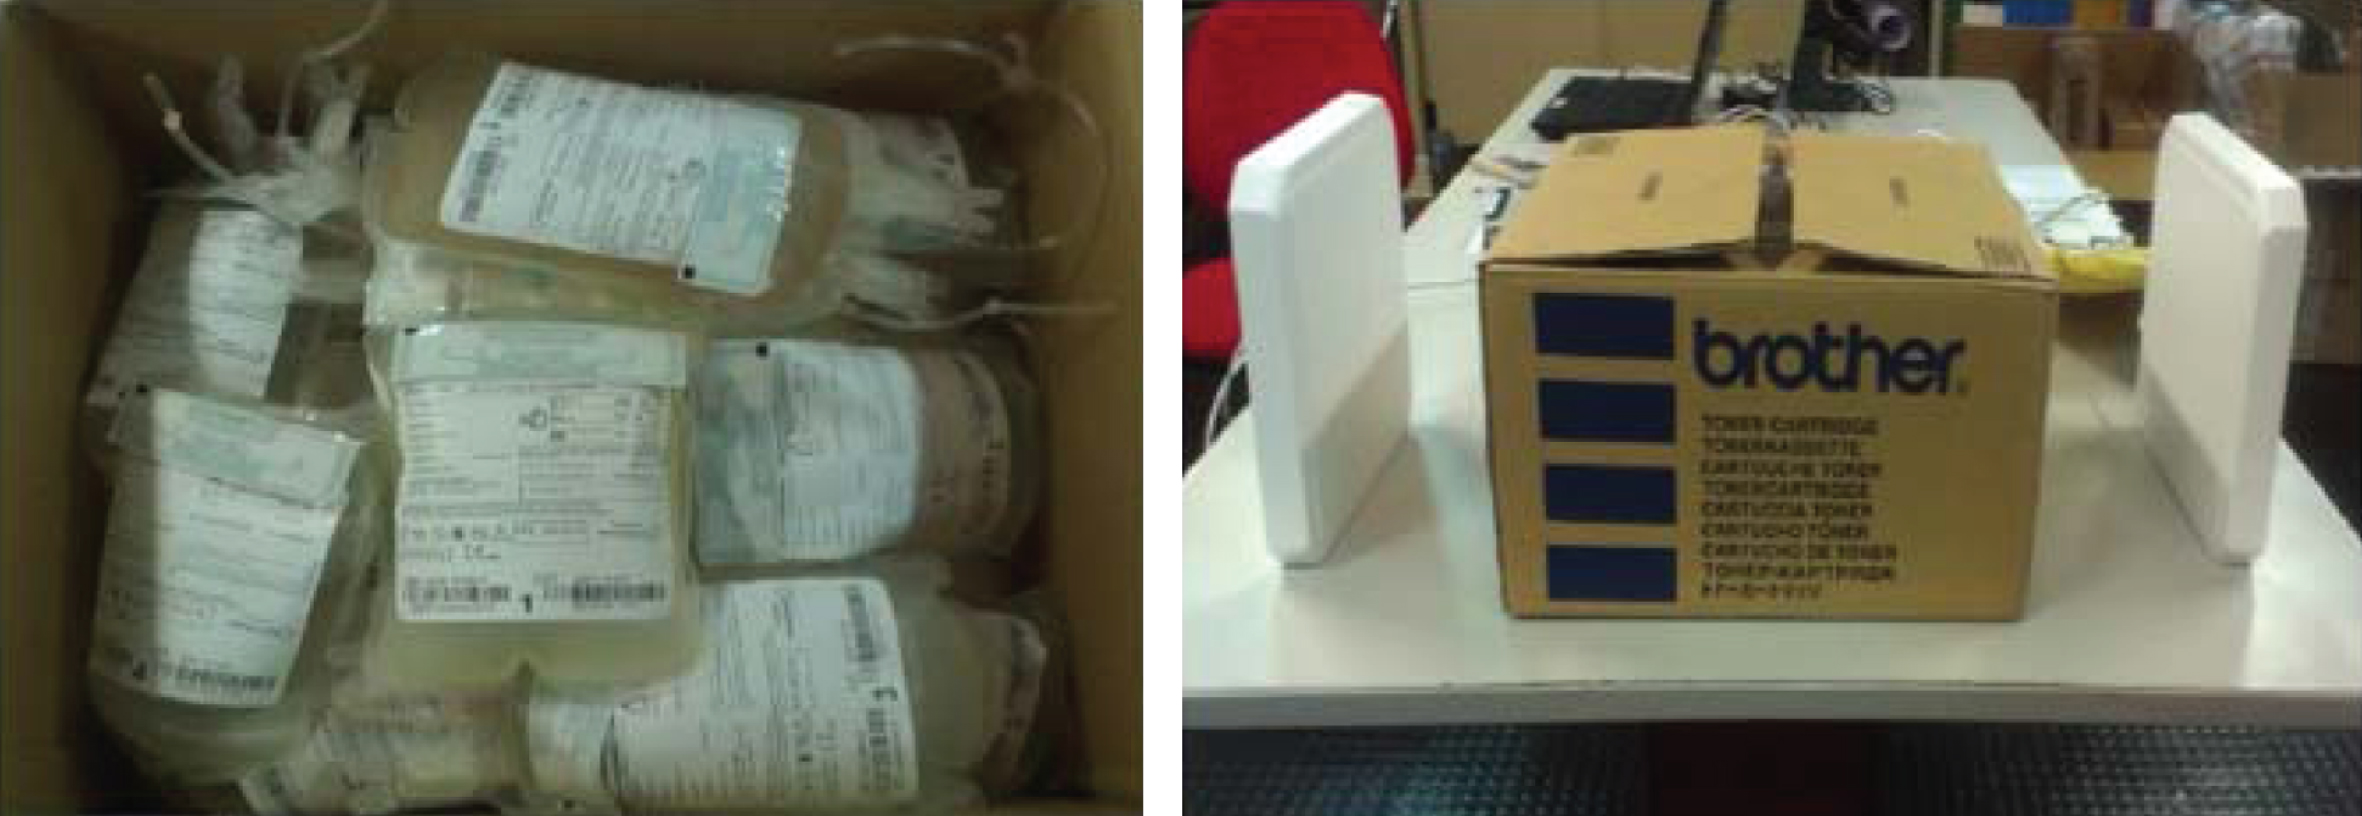 Tagged blood bags in the cardboard container used for the tests (a); container and far field antennas setup on the wooden table.